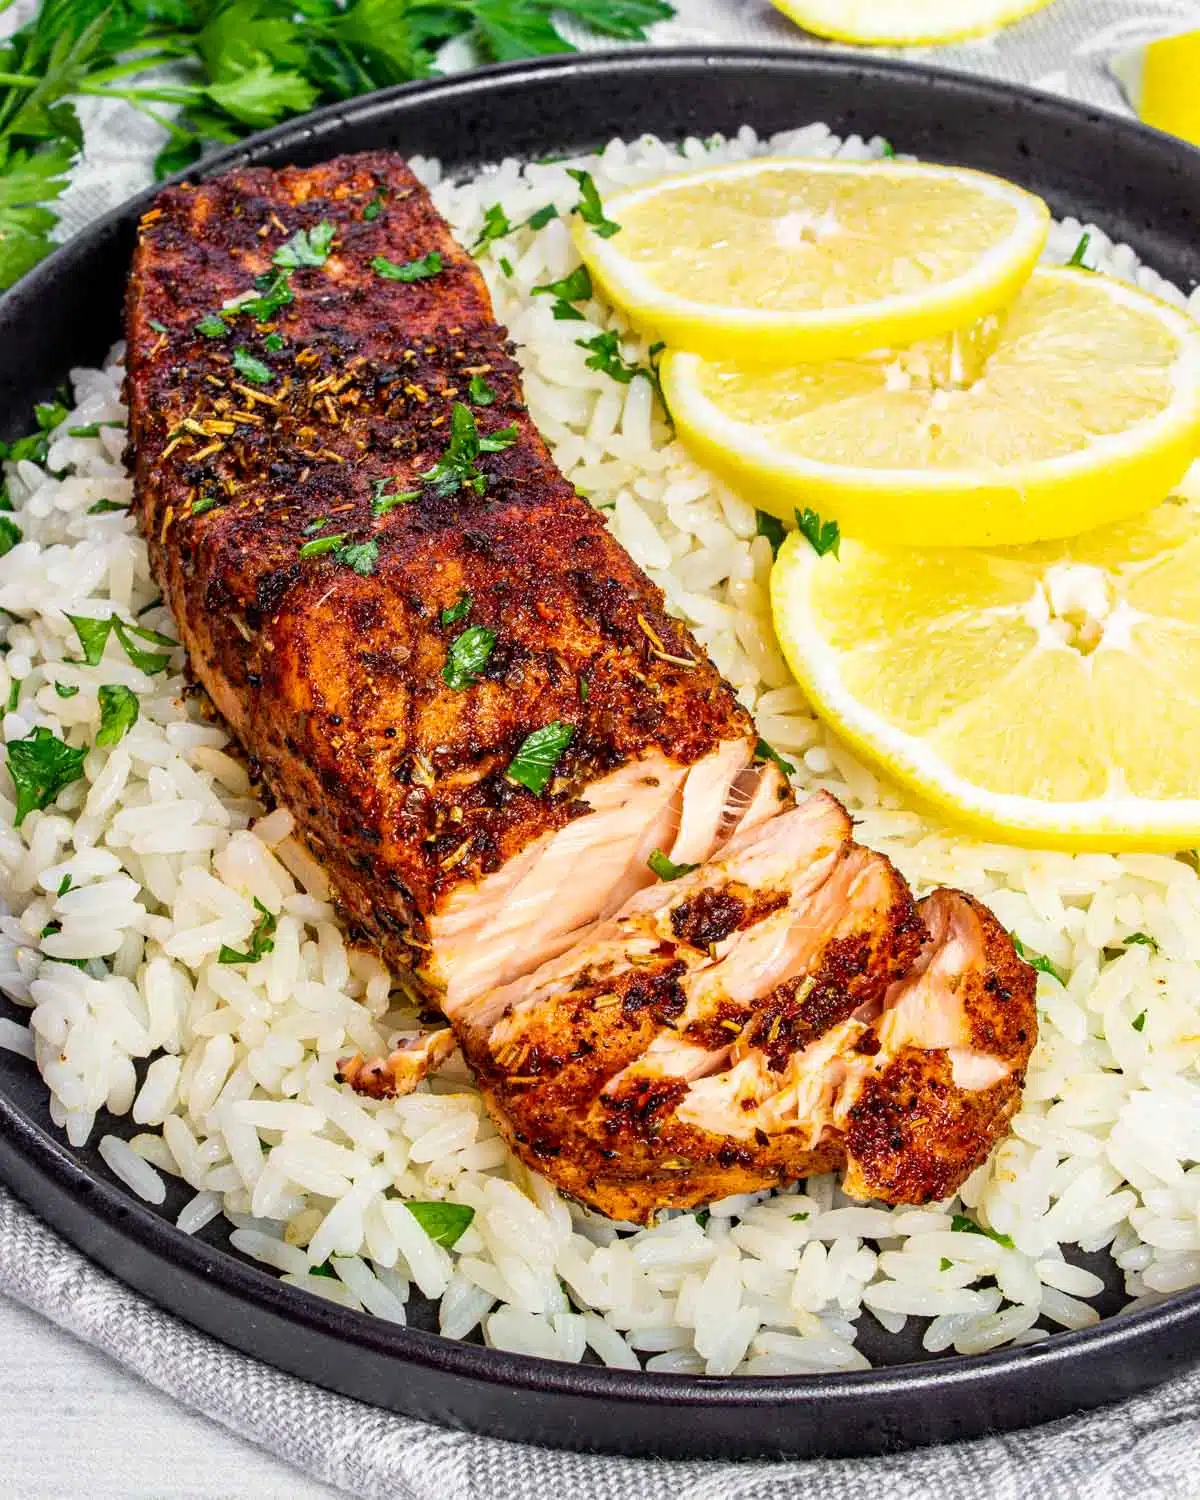 a salmon fillet on a bed of rice with lemon slices.